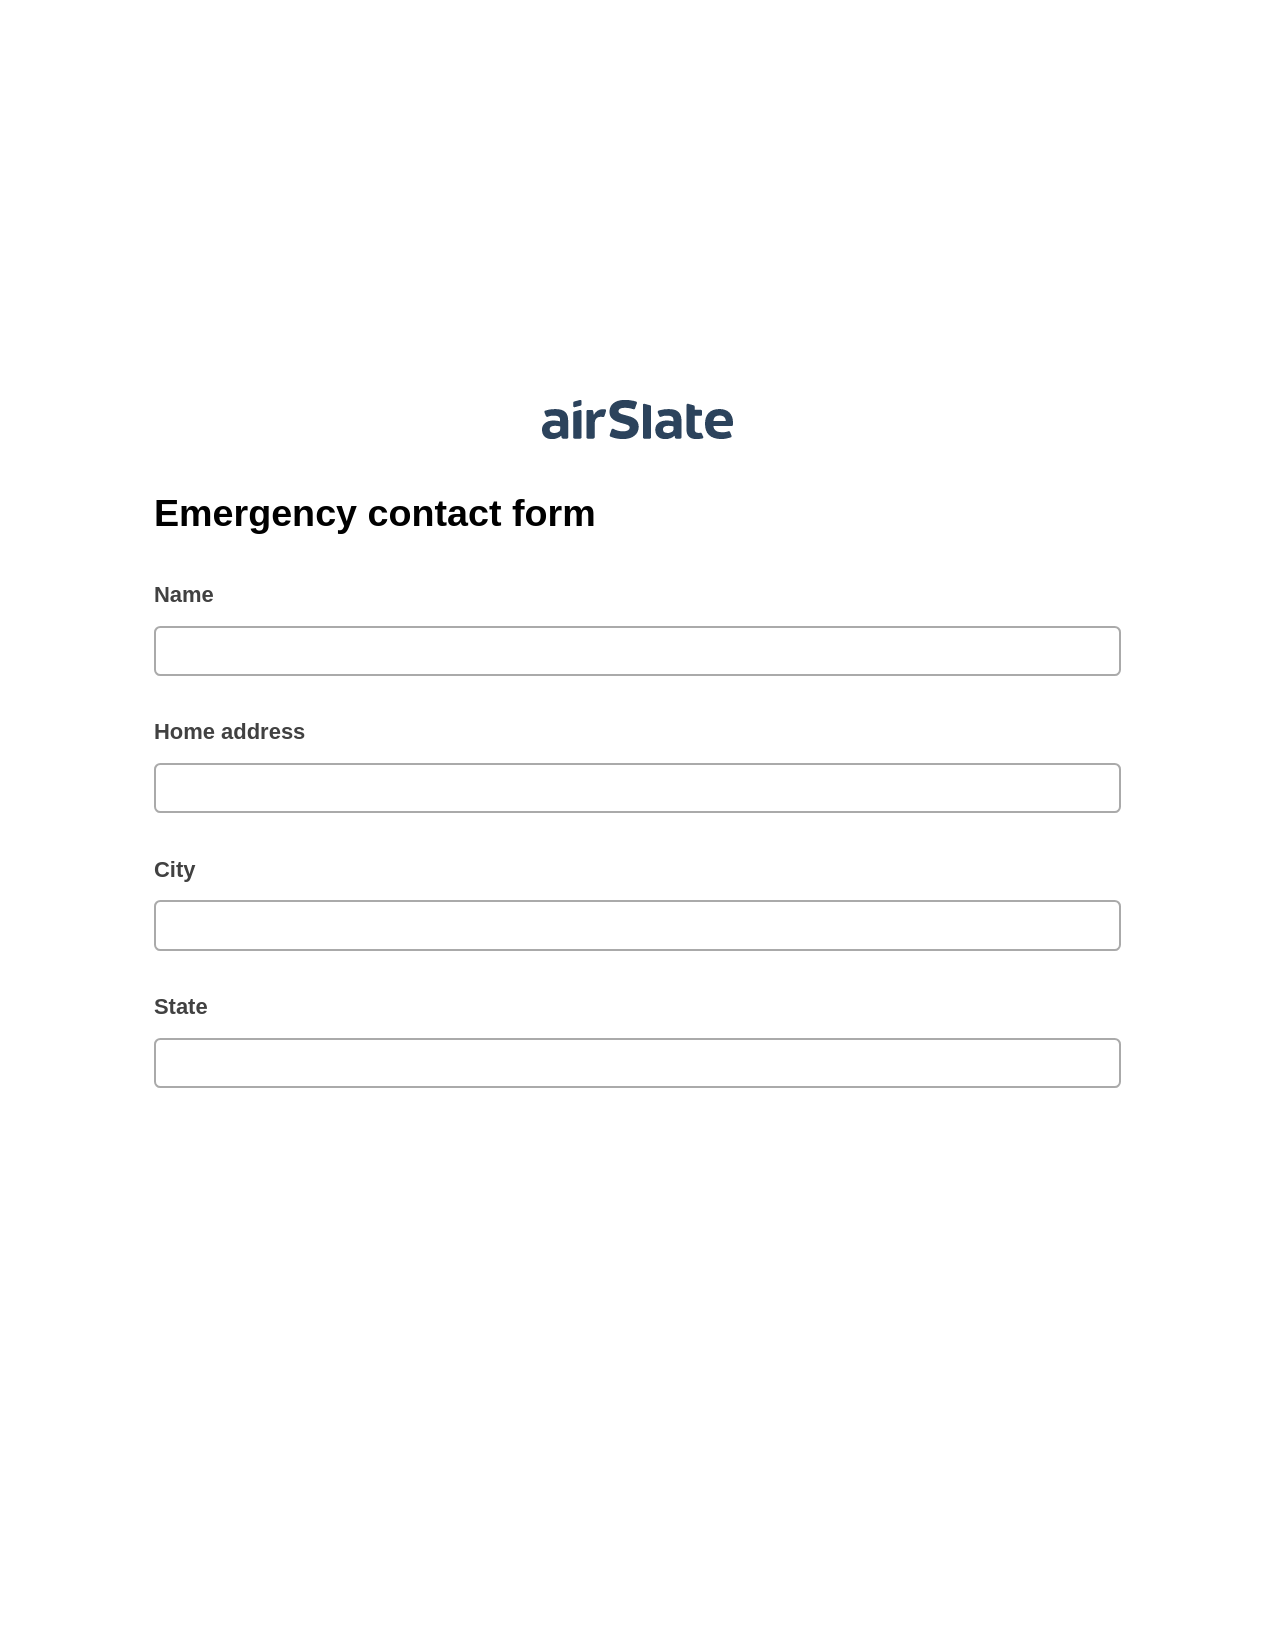 Multirole Emergency contact form Pre-fill from Google Sheet Dropdown Options Bot, Update NetSuite Records Bot, Export to Salesforce Bot